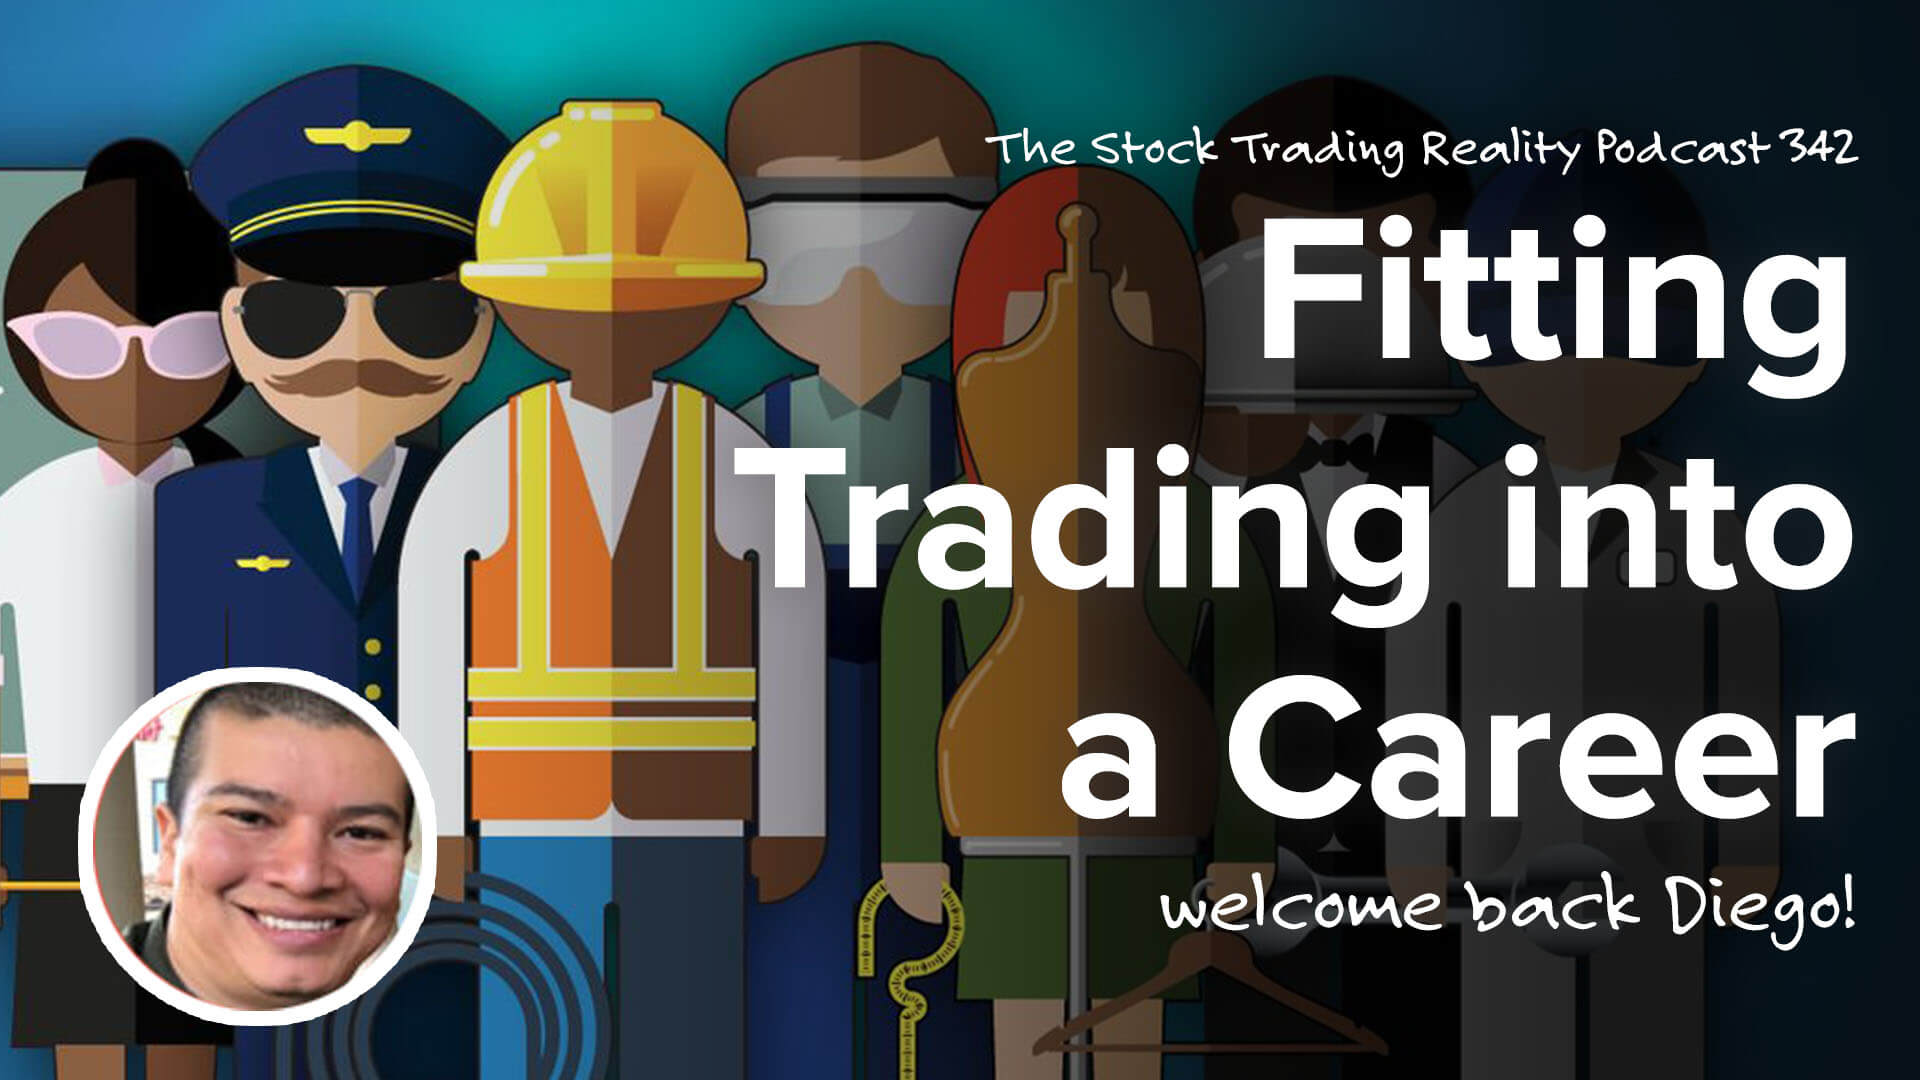 Fitting Trading into a Successful Career